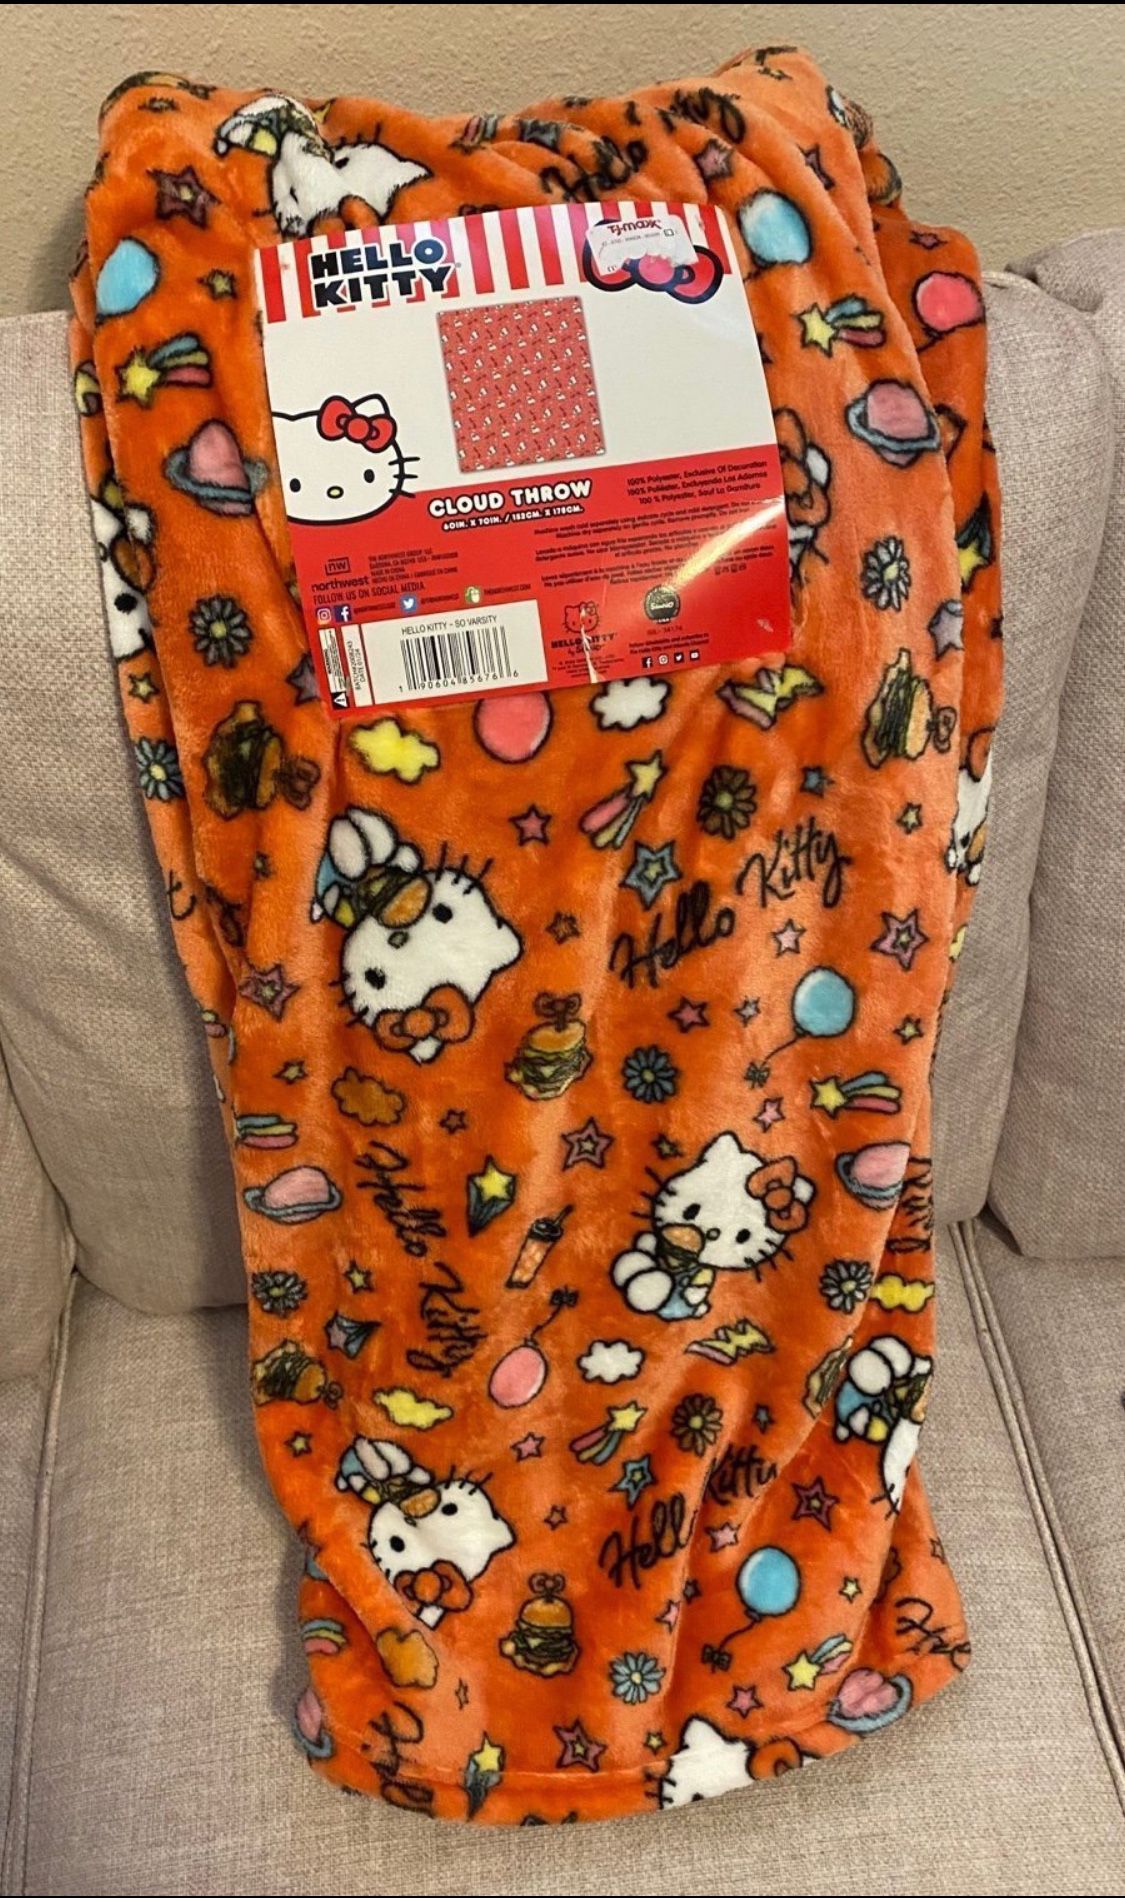 Hello kitty and friends blanket throw